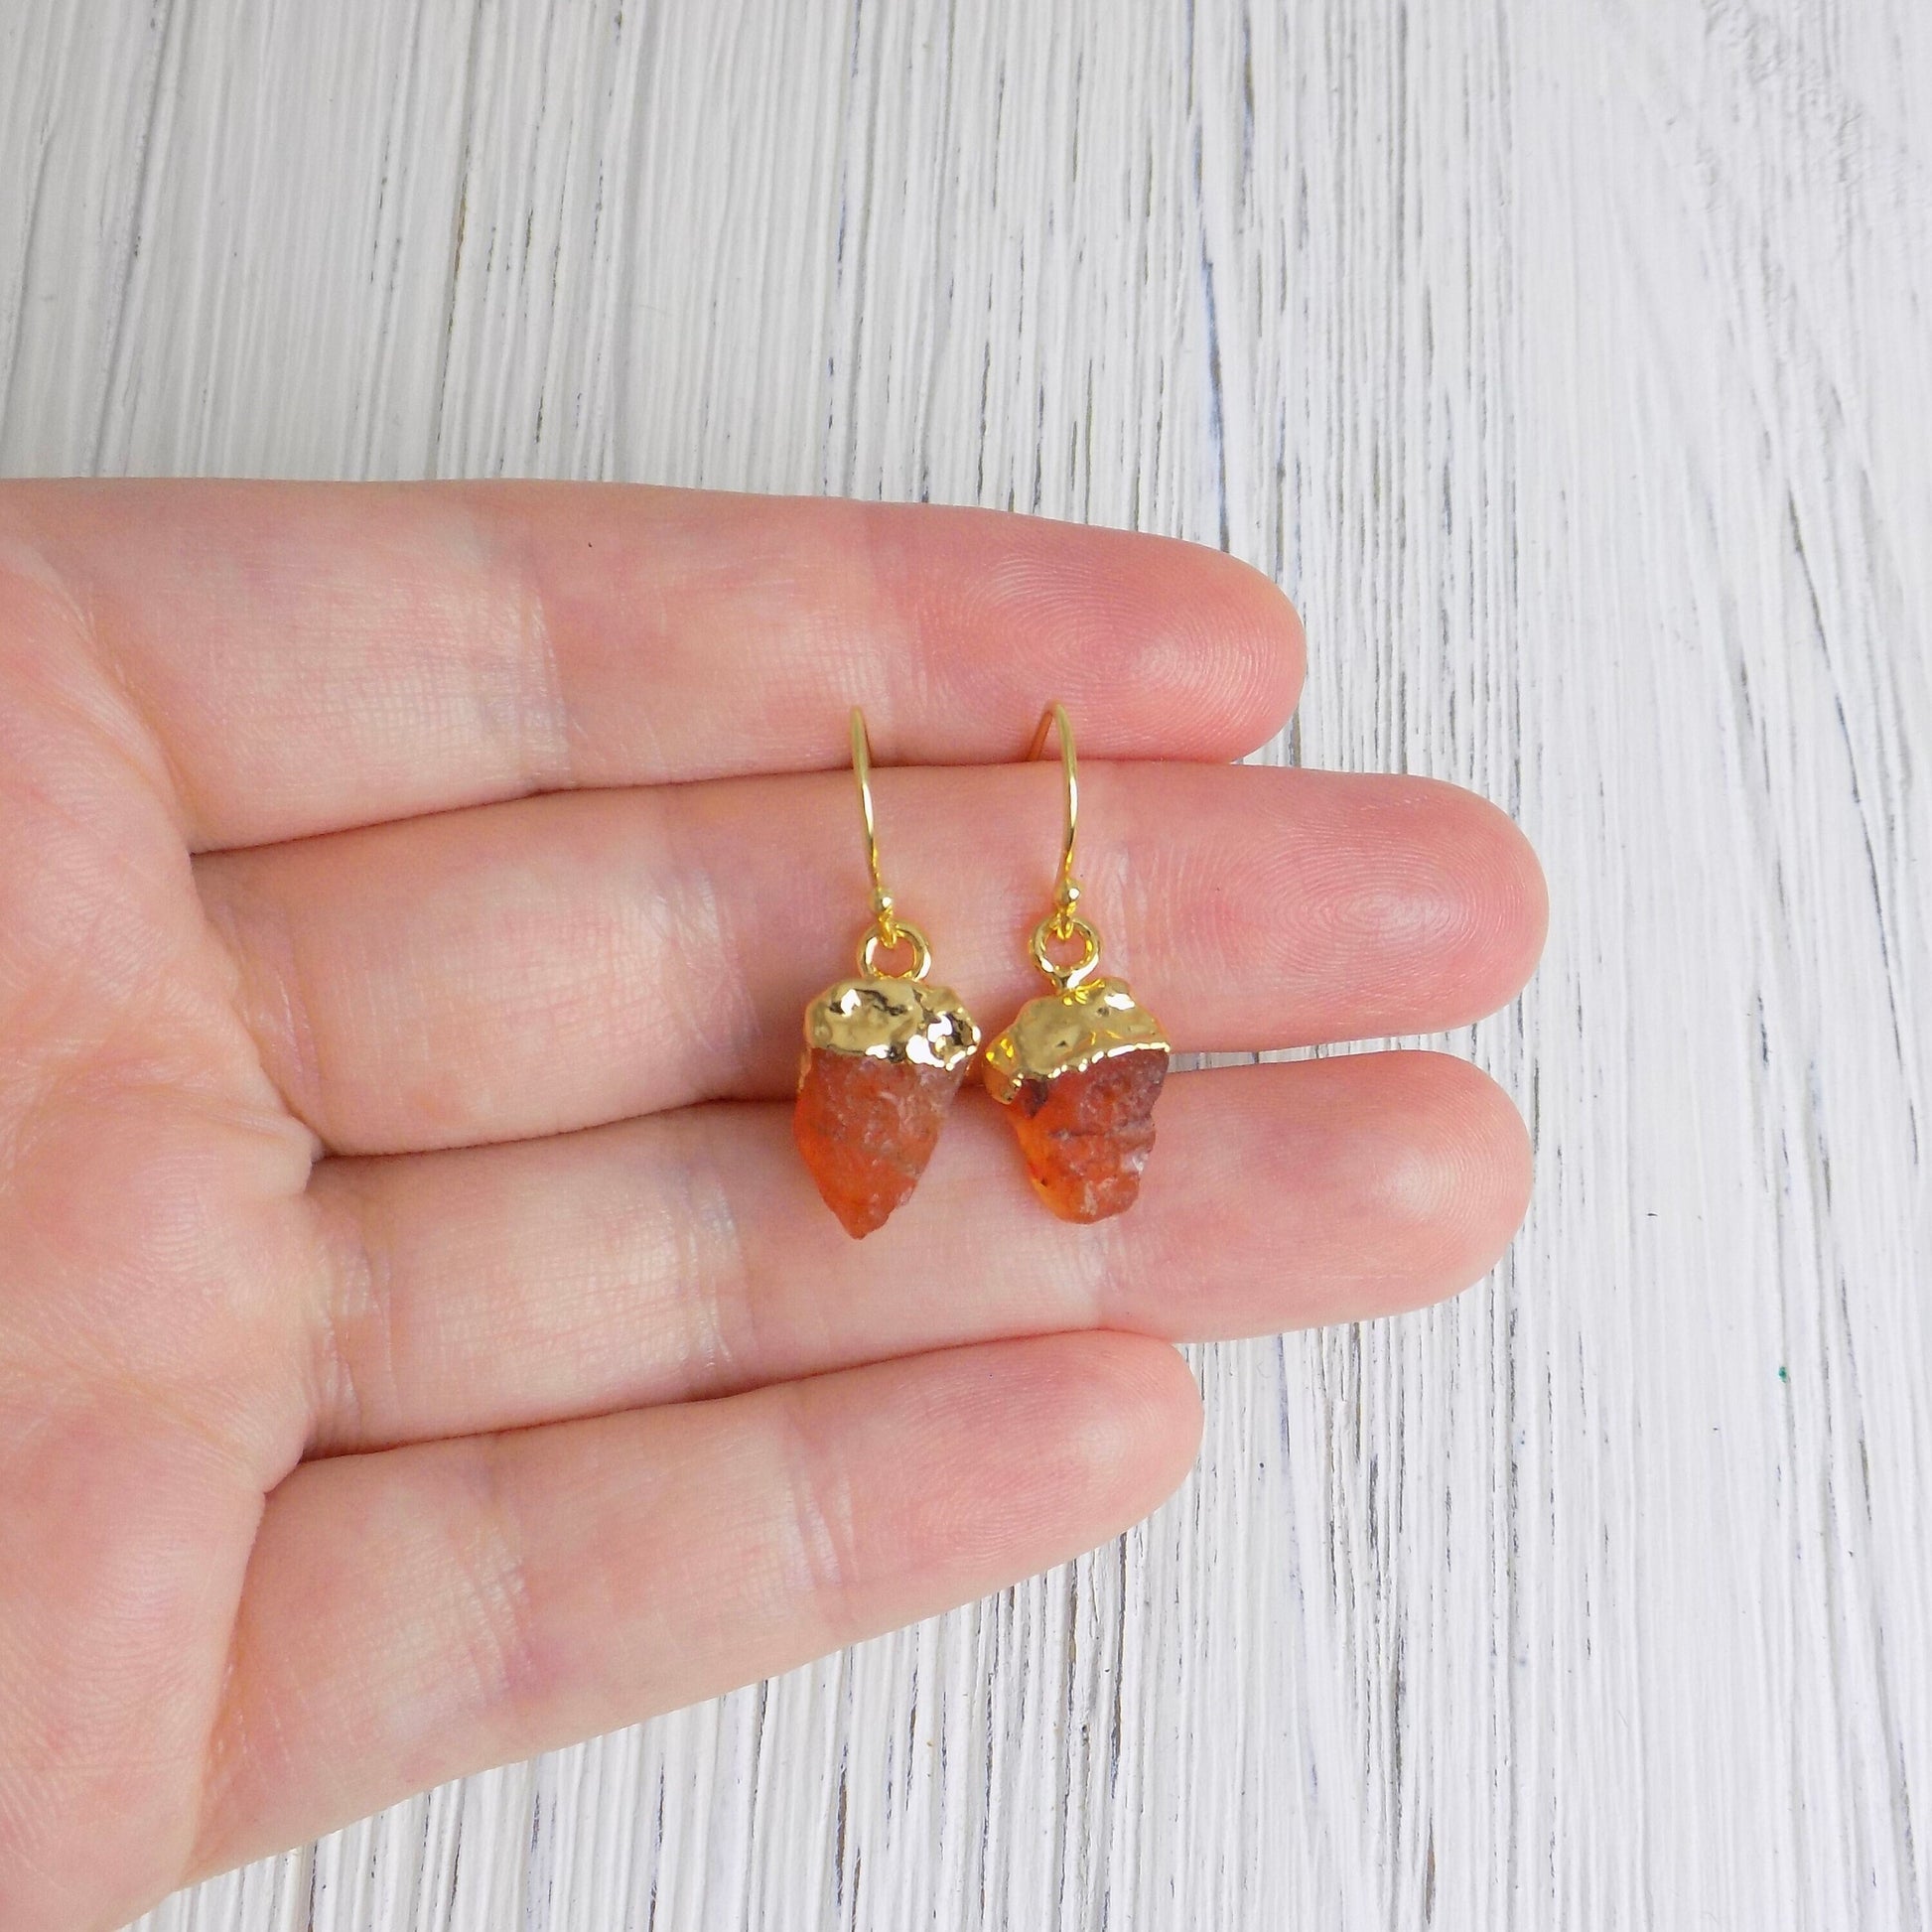 Christmas Gift, Raw Carnelian Earrings Gold, Rough Stone Orange Brown Earring, Gifts For Wife, M6-700